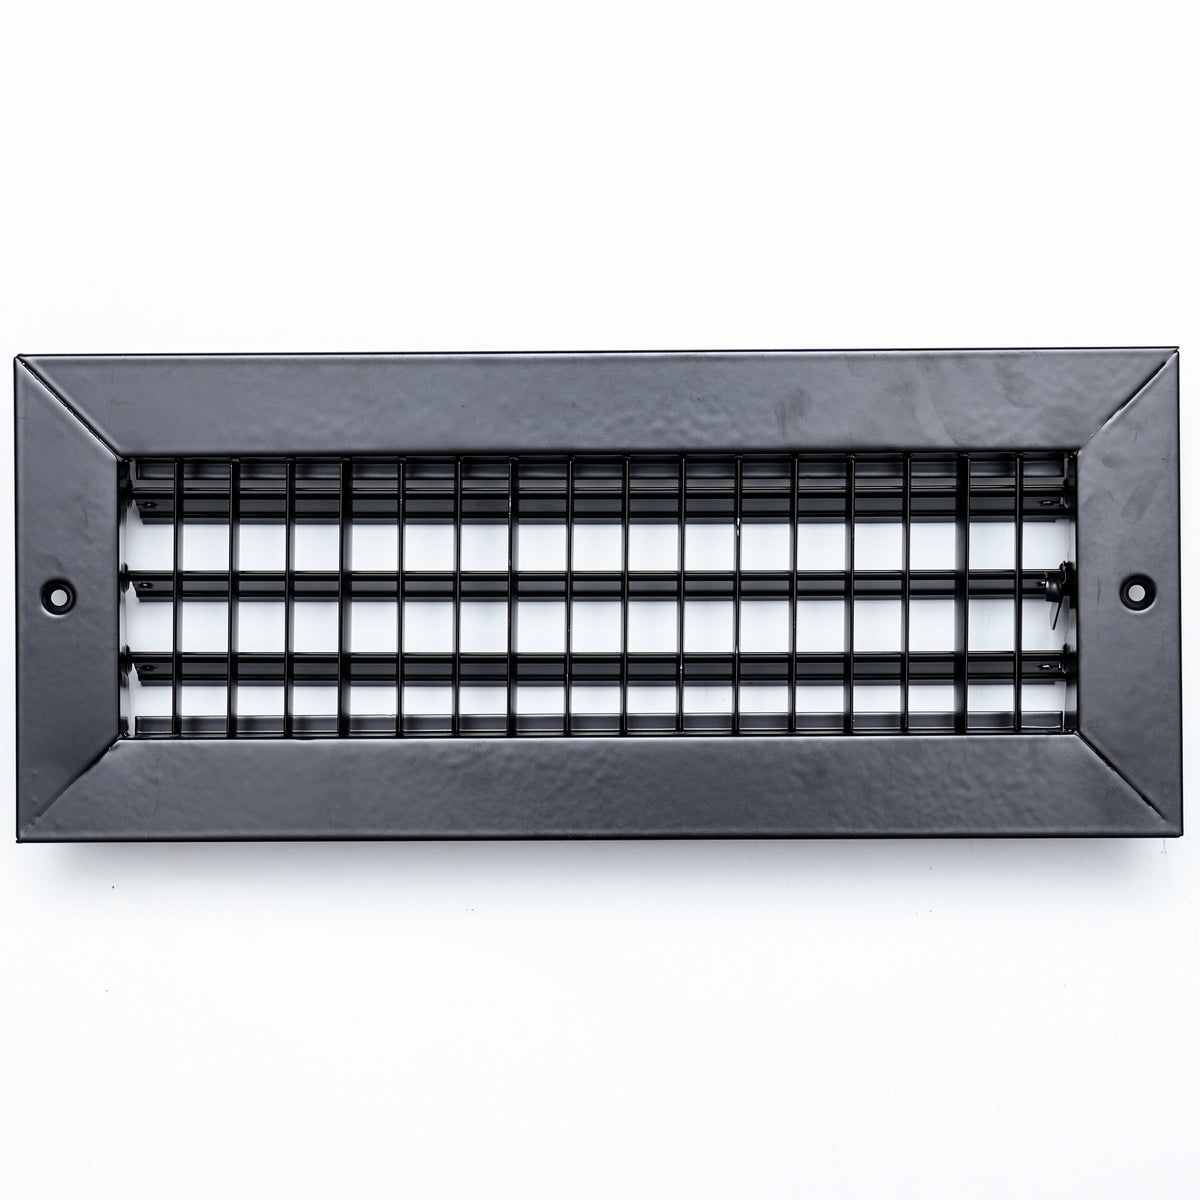 airgrilles 12"w x 4"h steel adjustable air supply grille  -  register vent cover grill for sidewall and ceiling  -  black  -  outer dimensions: 13.75"w x 5.75"h for 12x4 duct opening hnd-adj-bl-12x4  - 1